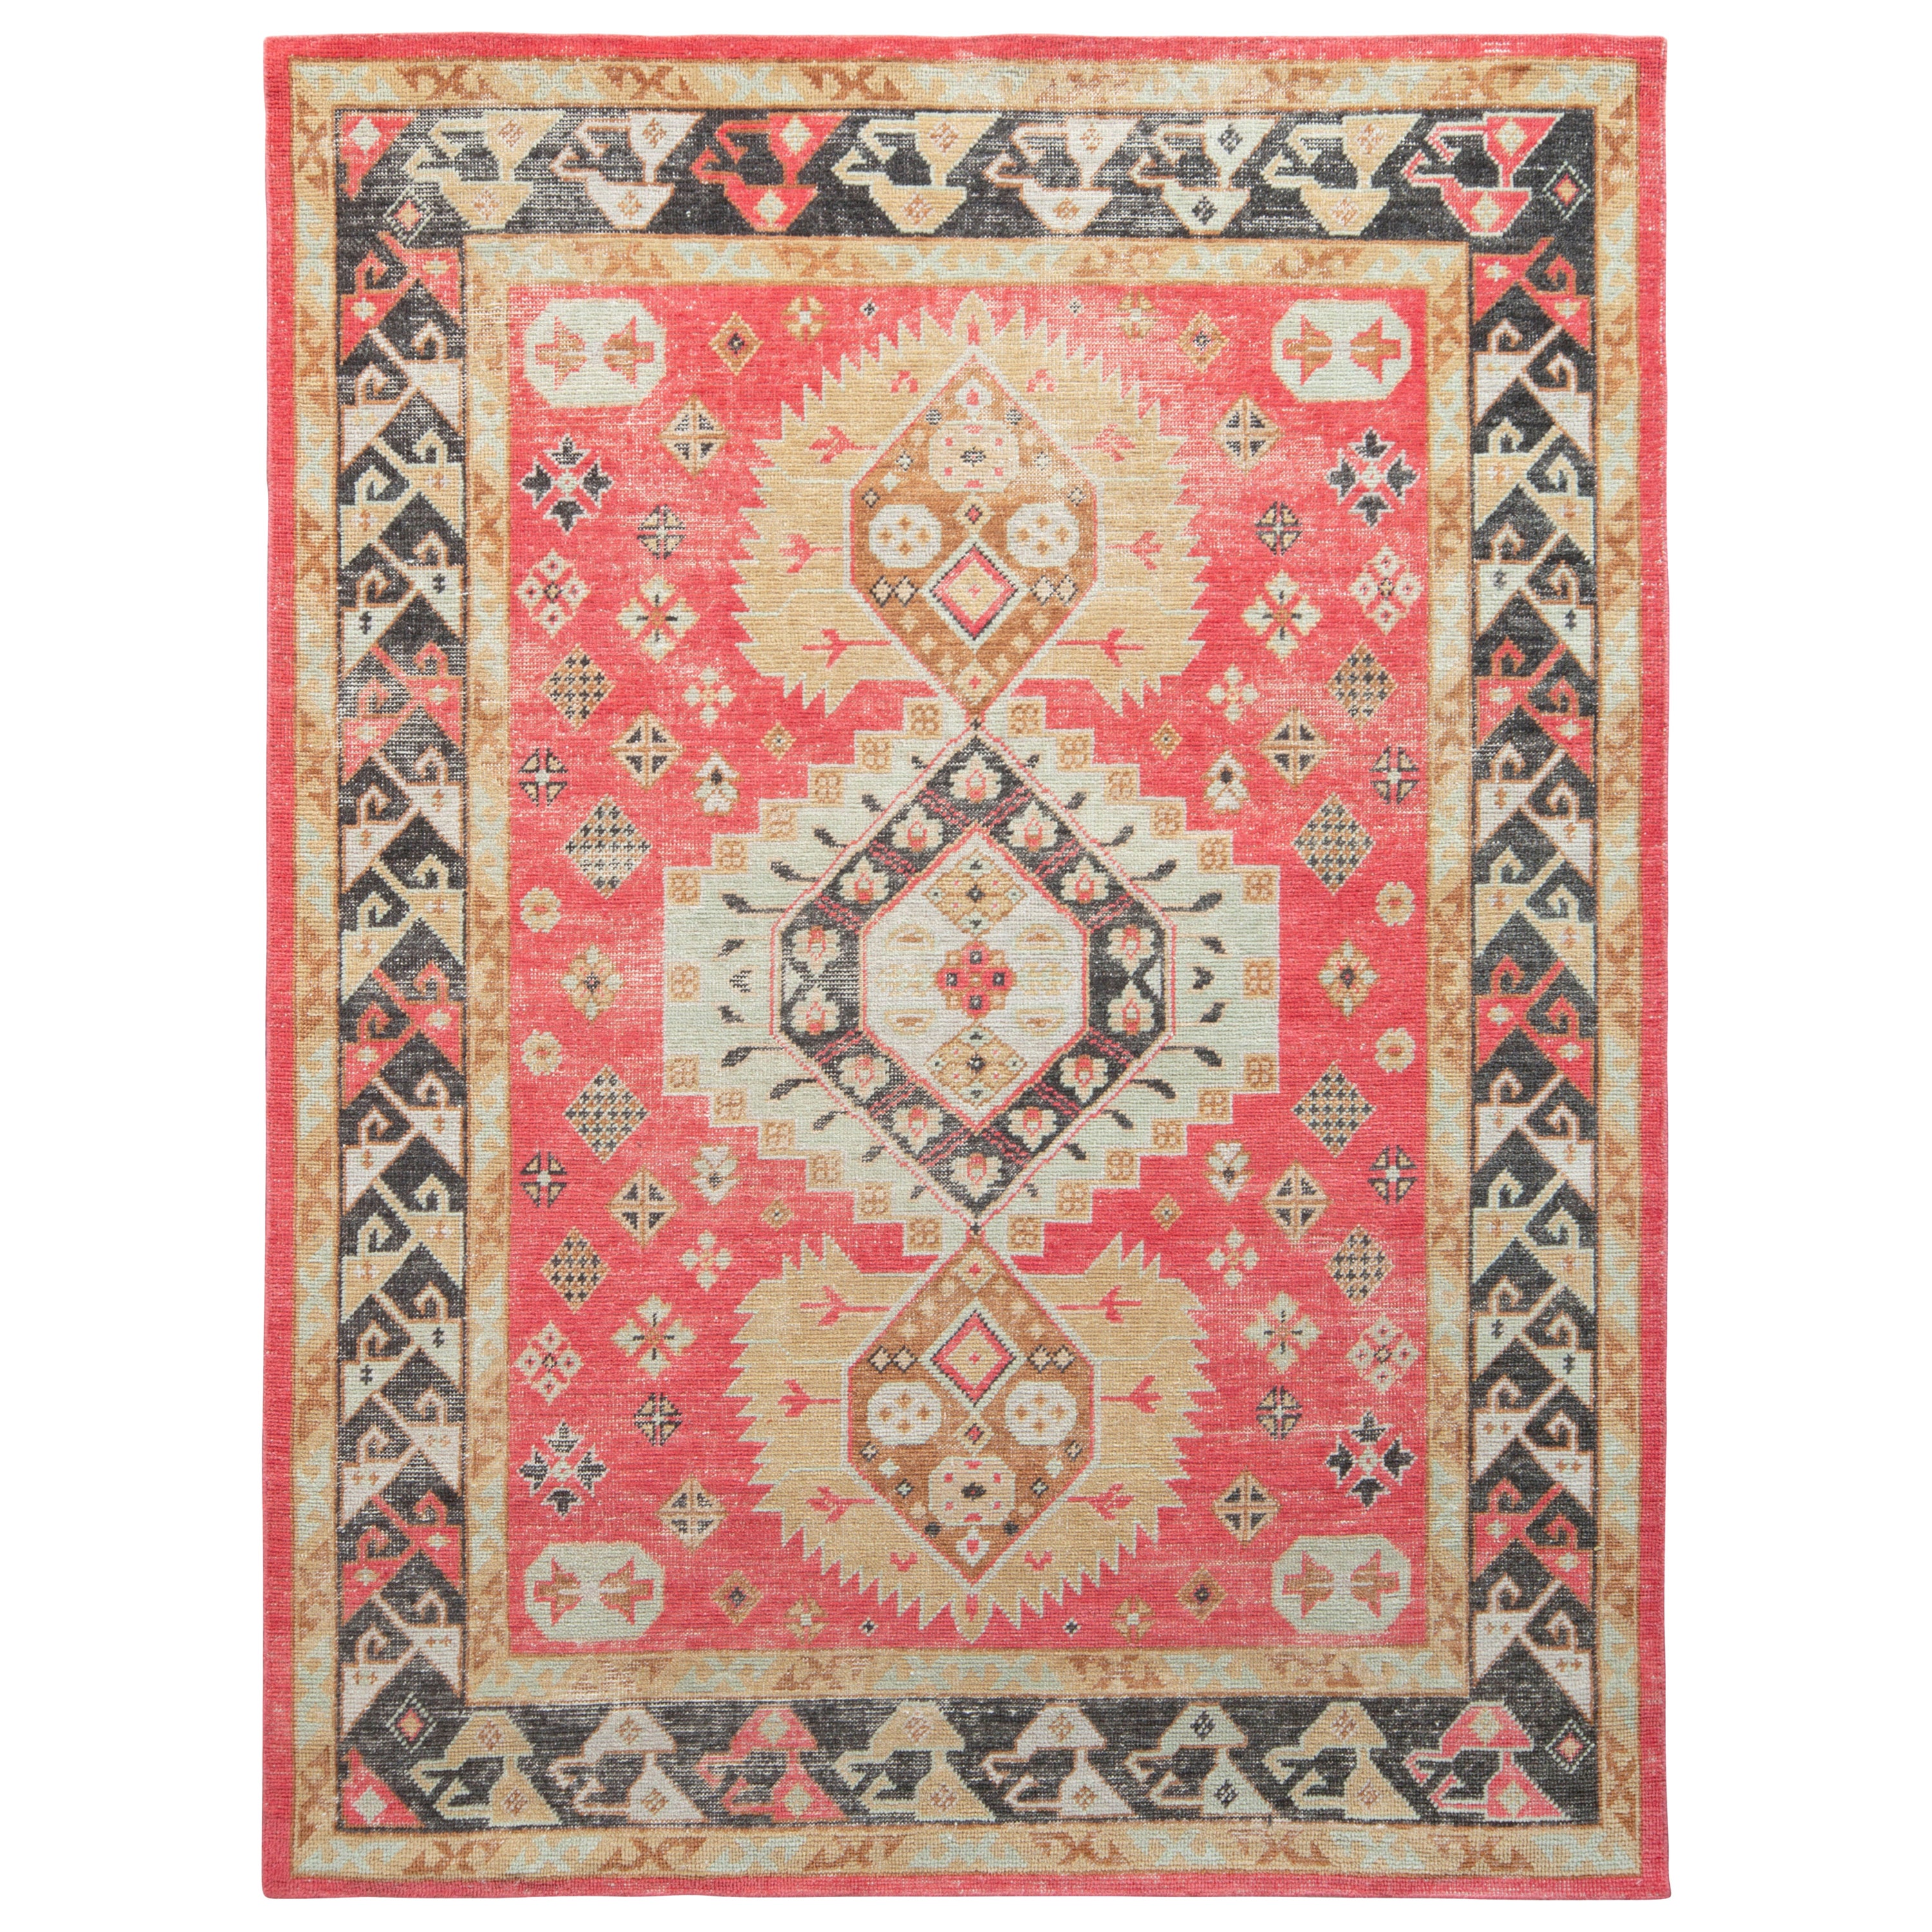 Rug & Kilim's Distressed Classic Style Rug in Red, Beige-Brown Medallion Motif